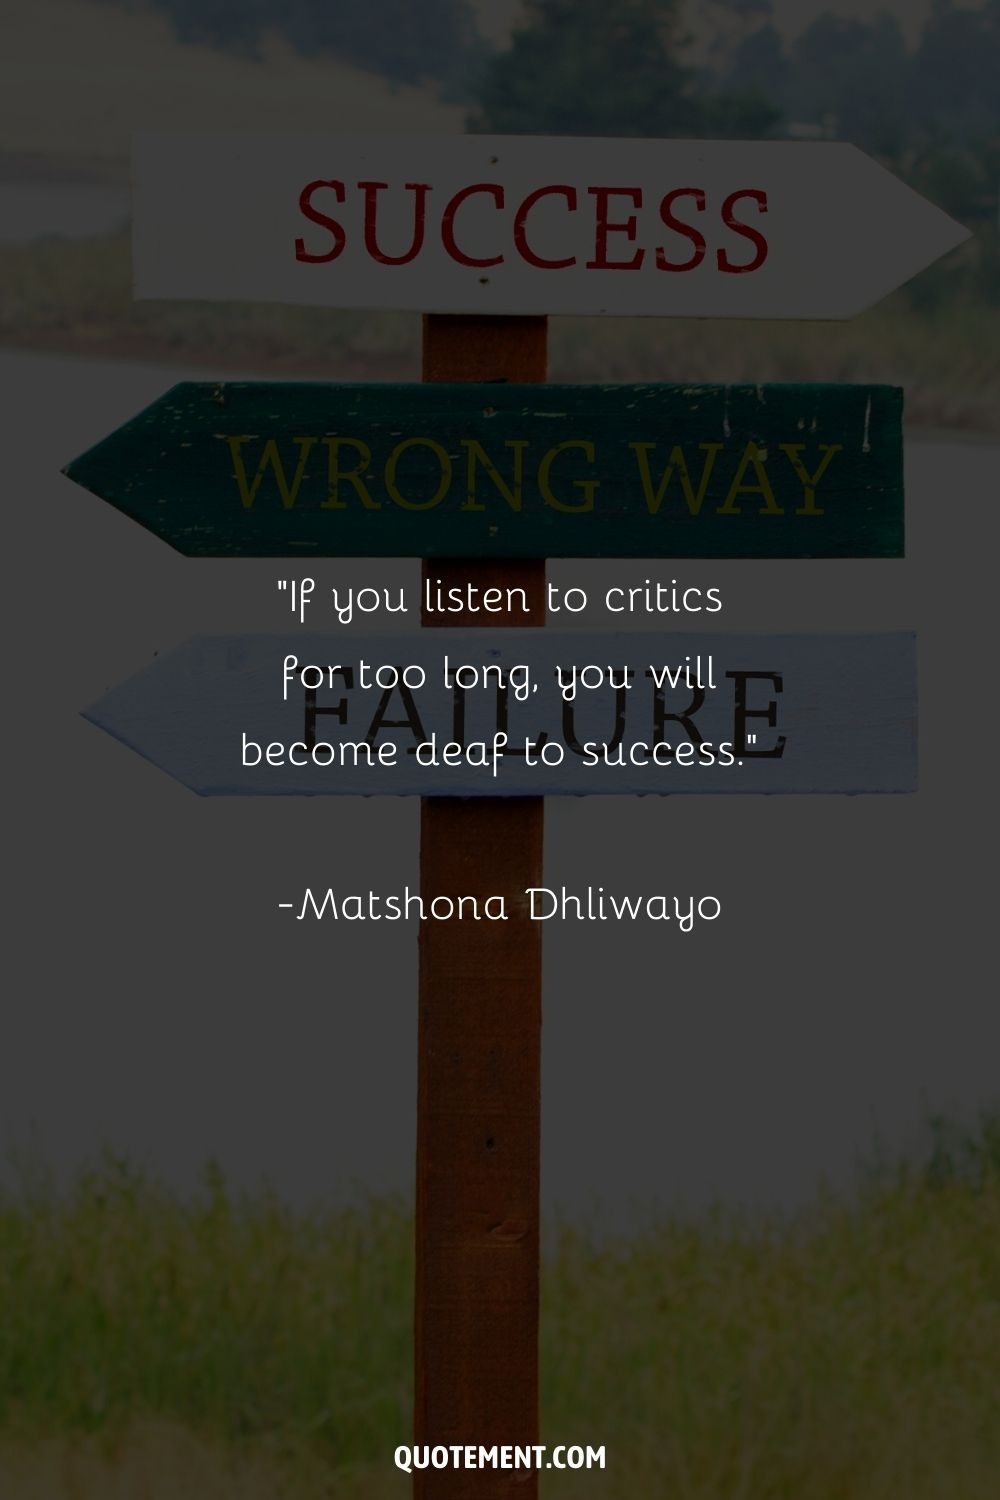 “If you listen to critics for too long, you will become deaf to success.” ― Matshona Dhliwayo